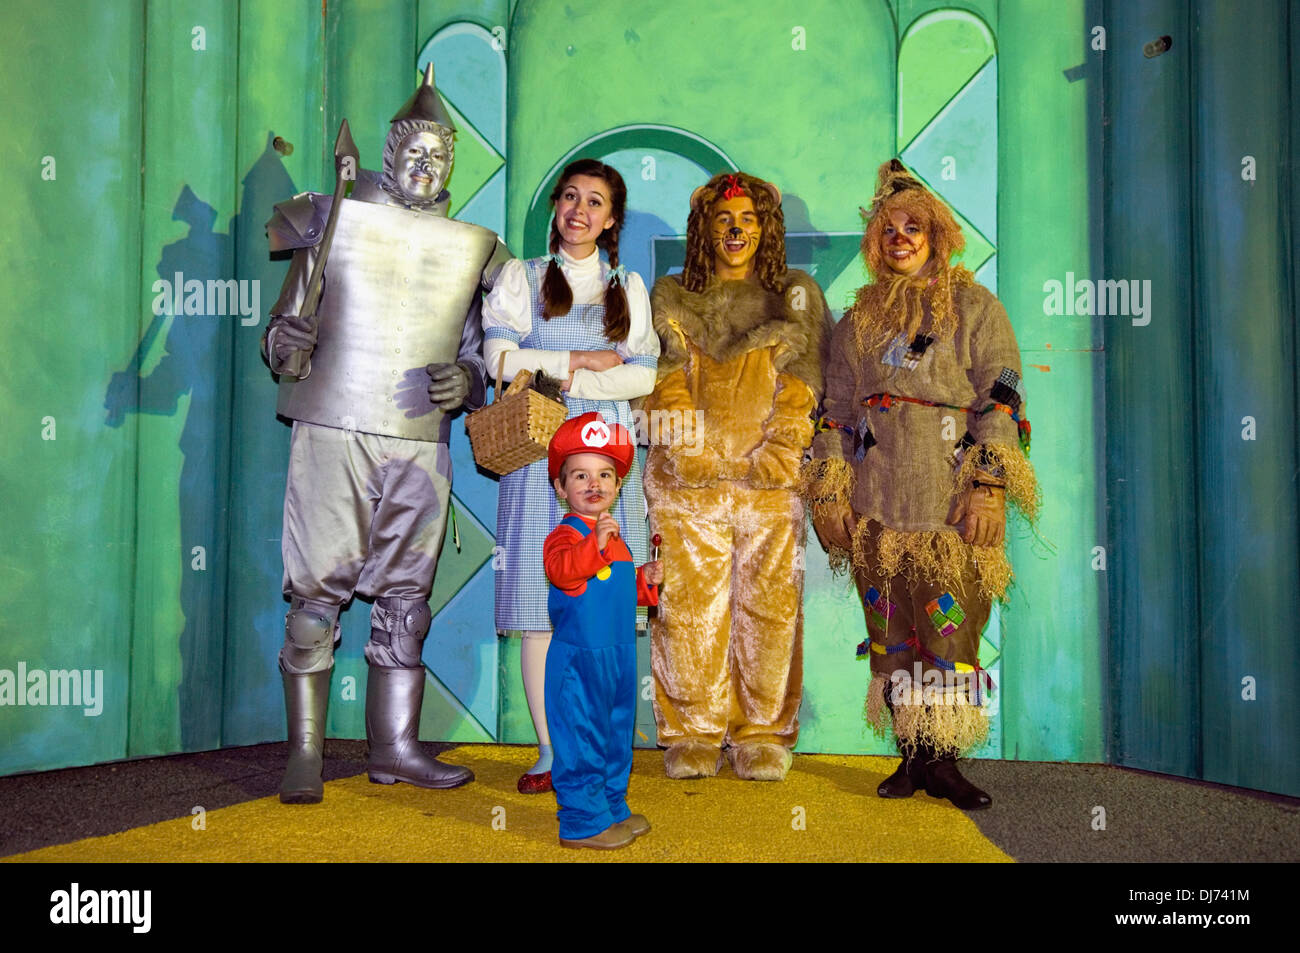 Toddler Dressed Up as Mario for Halloween with Charactors from the Wizard of Oz at the Louisville Zoo Halloween Party Stock Photo